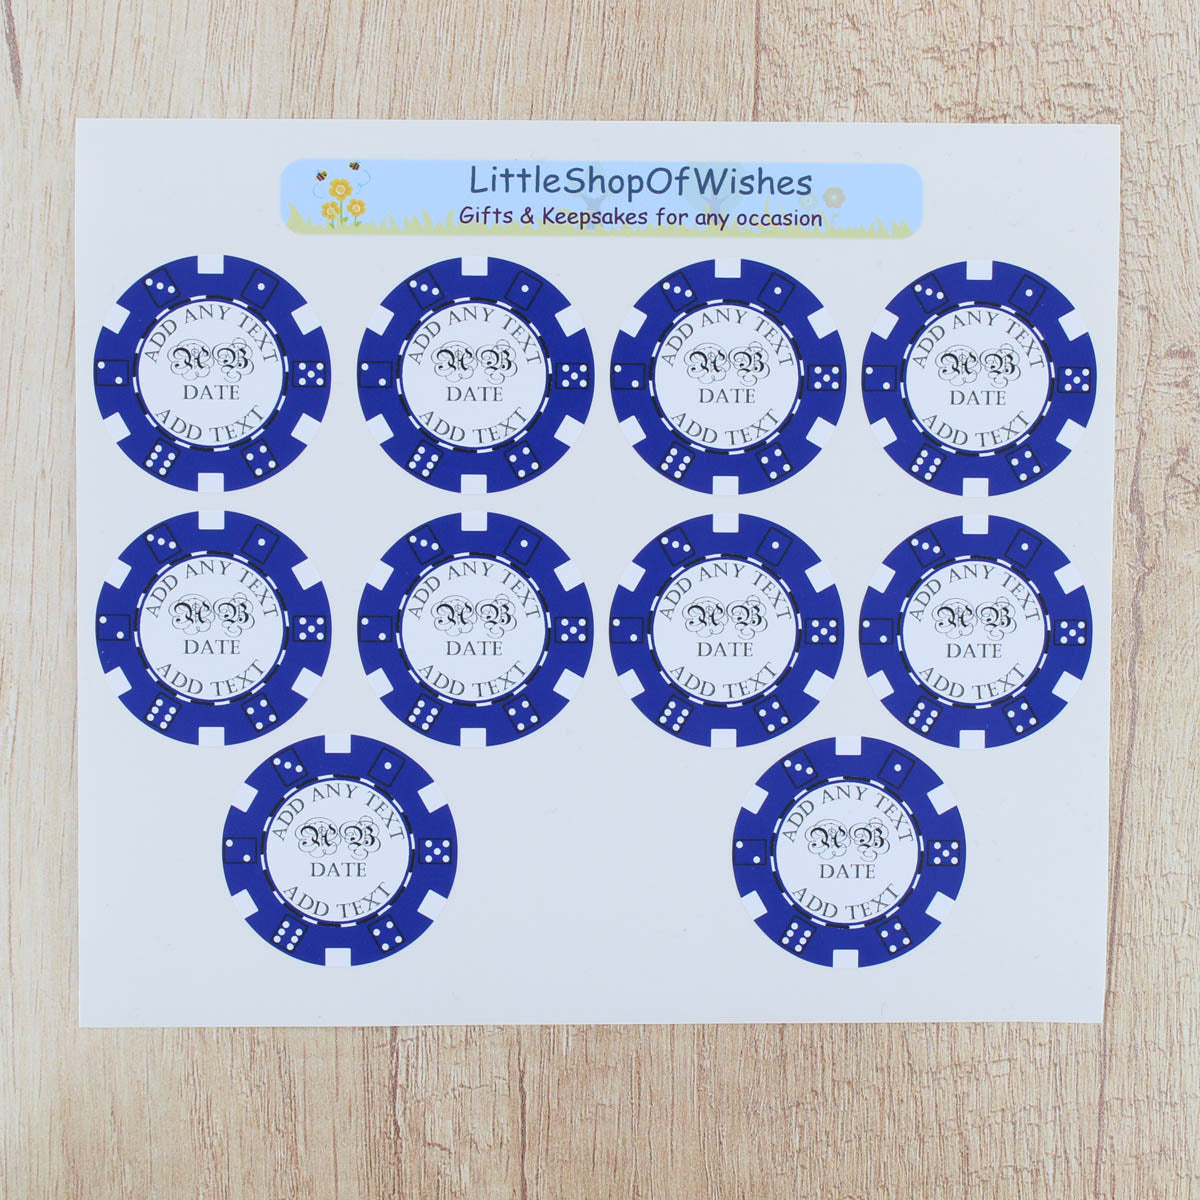 Personalised Poker Chip Stickers Casino Wedding Favours Las Vegas Party Decor - Pack of 10